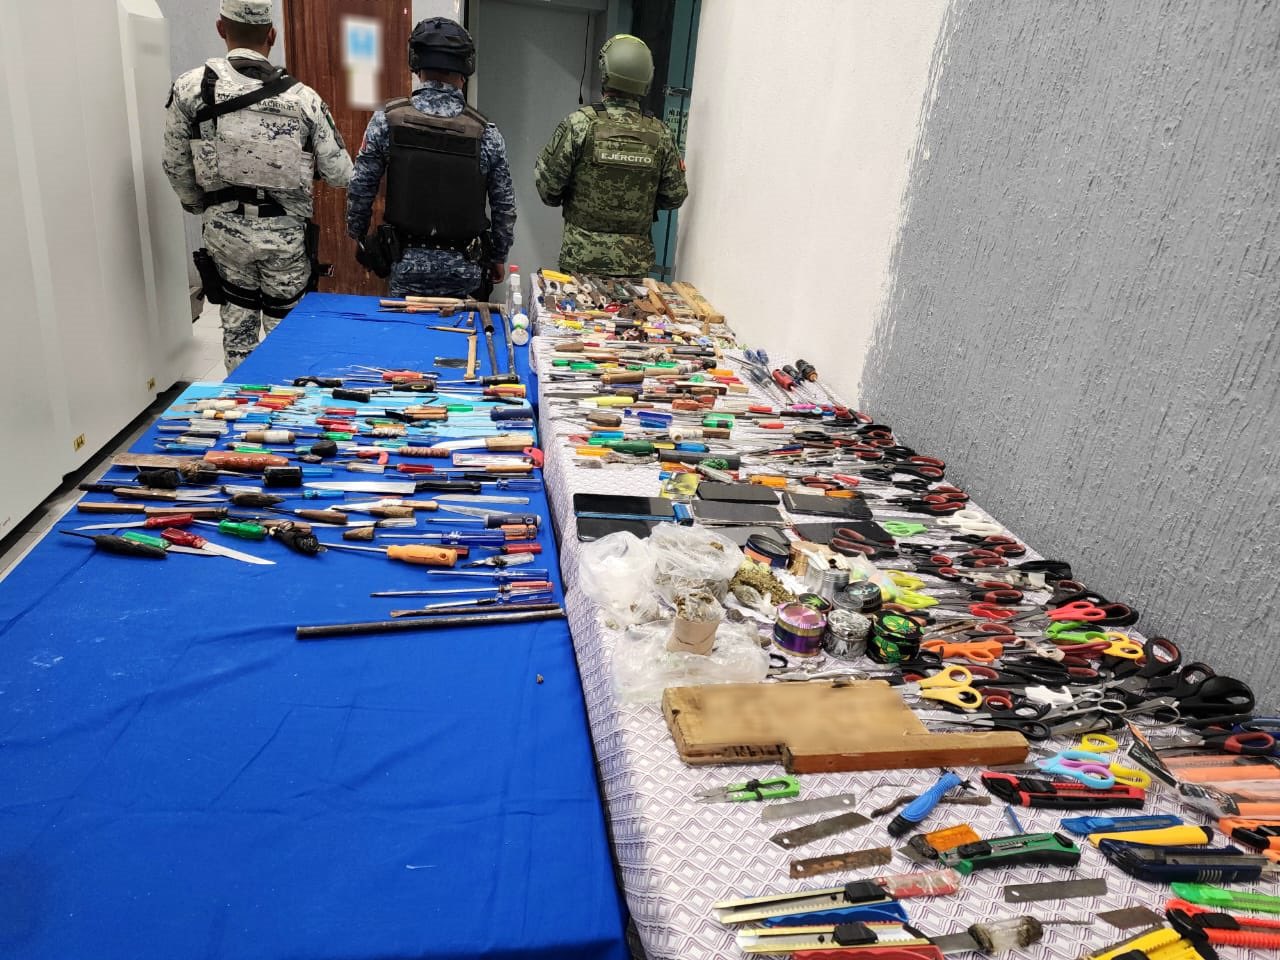 Inside two prisons in Hidalgo, various unauthorized materials were found, from drugs to technological items (Photo: National Guard)